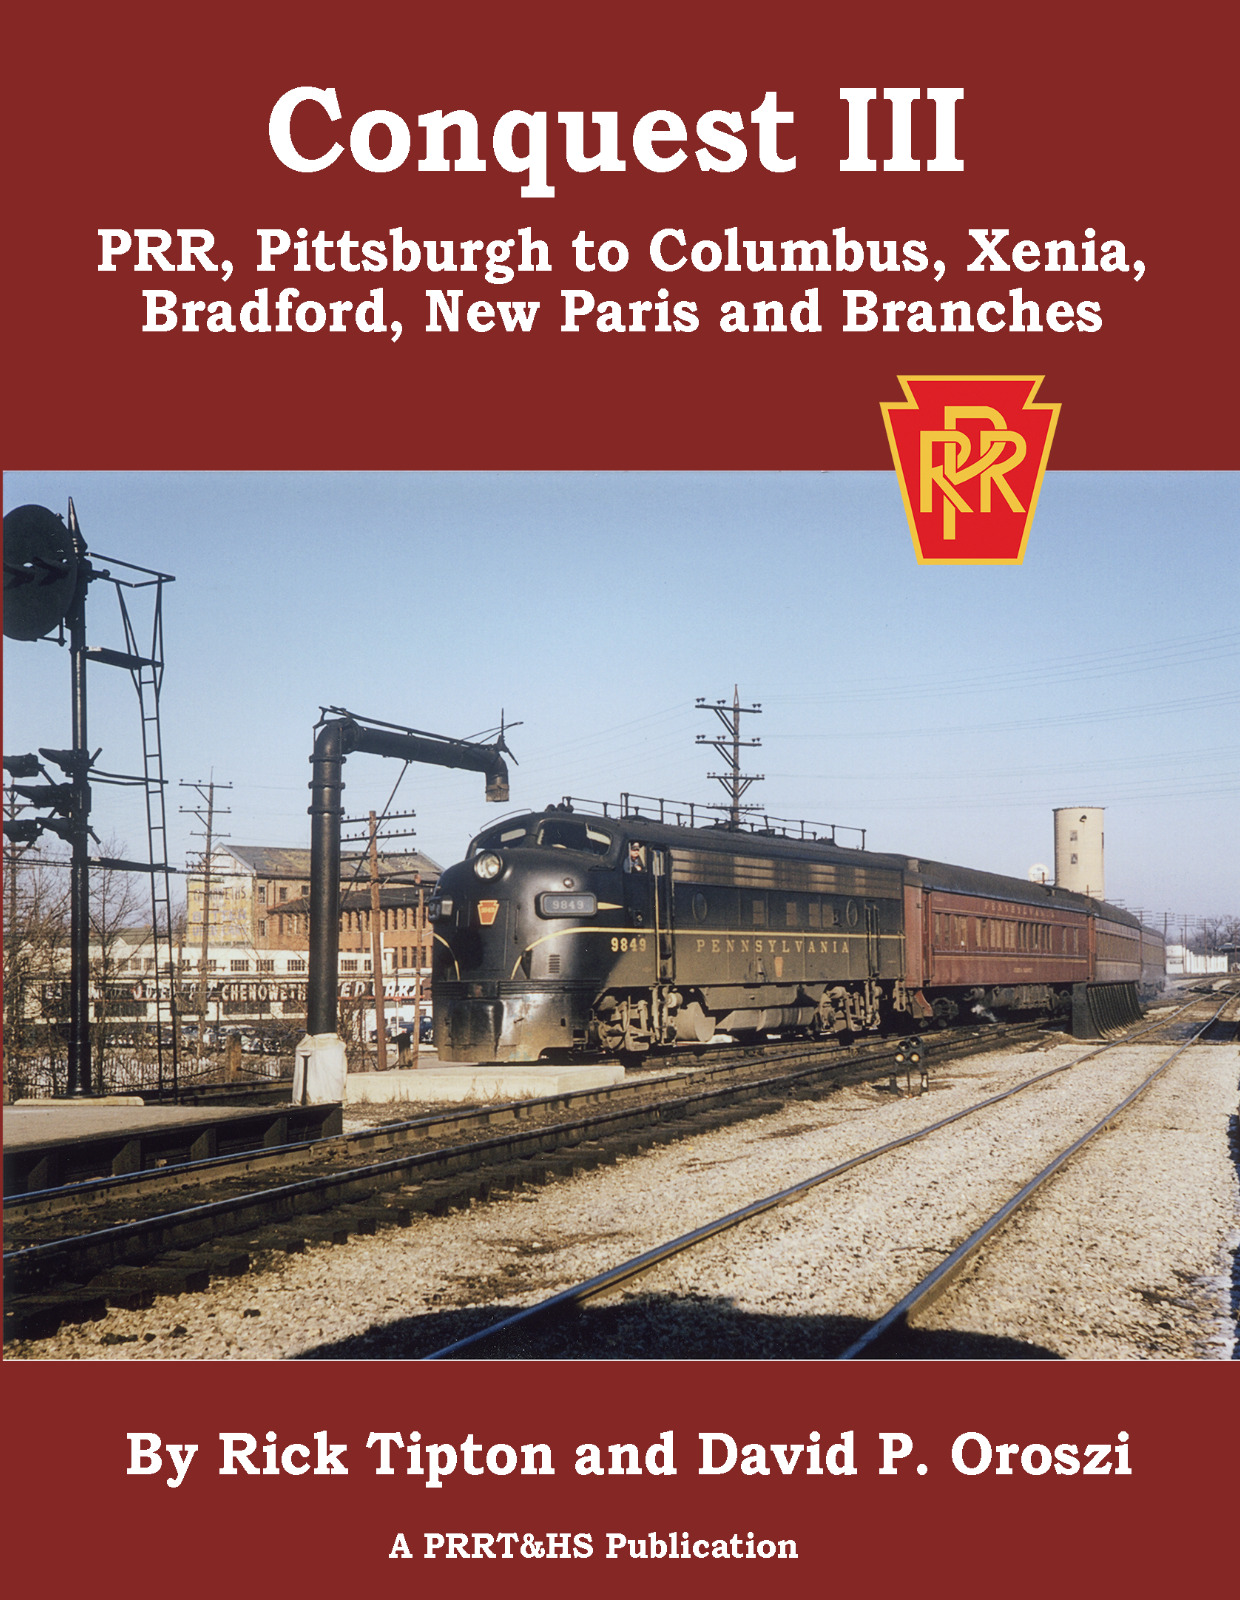 PRR Conquest III: Pittsburgh to Columbus, Bradford, New Paris and Branches (NEW)